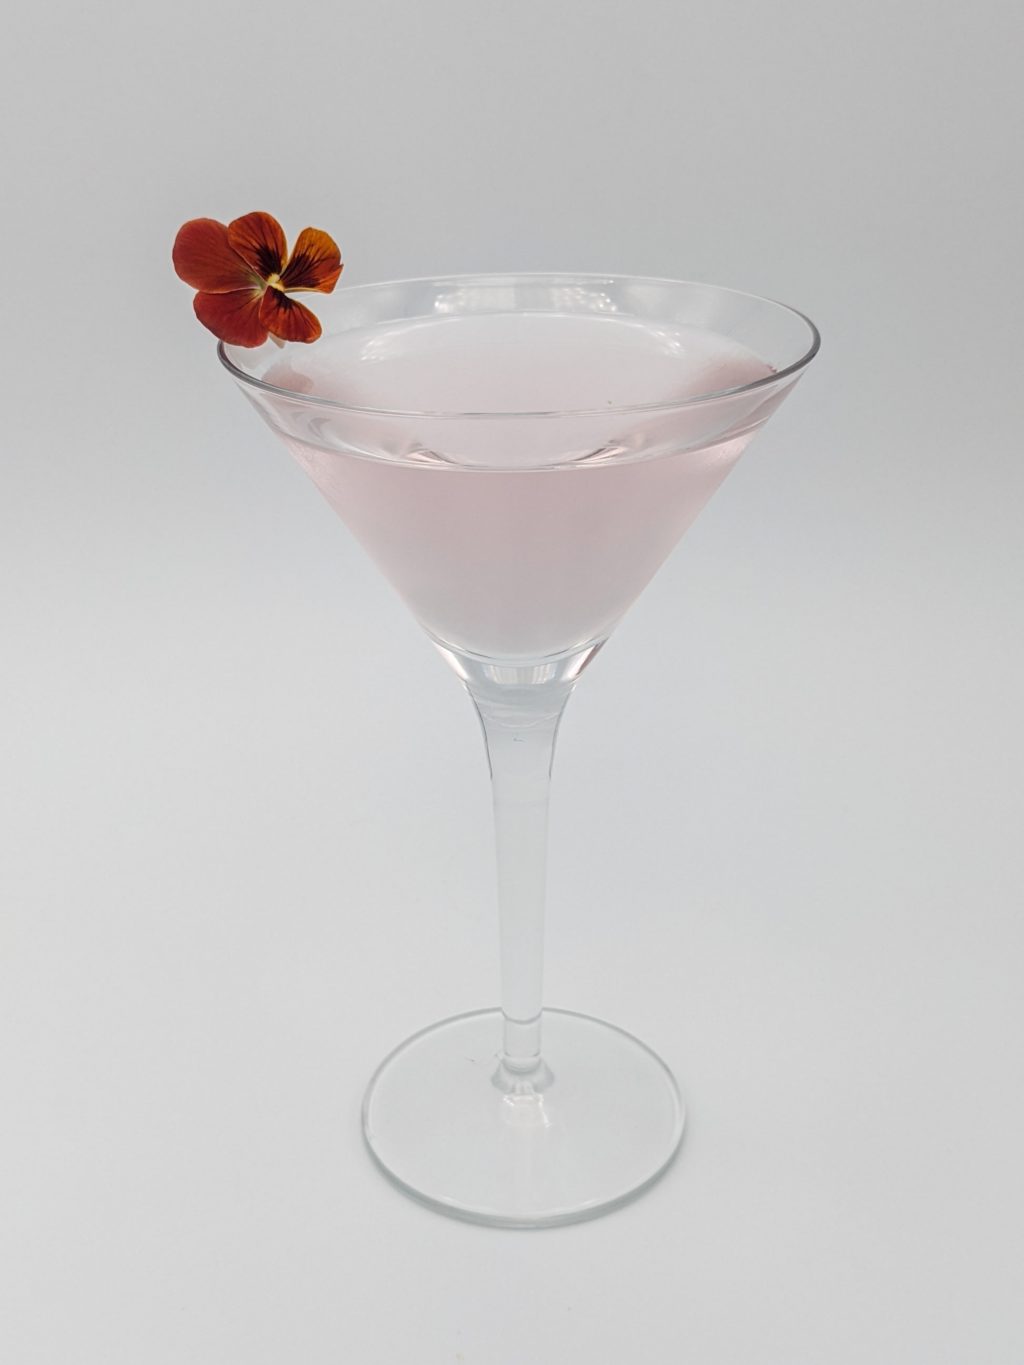 light pink liquid in a martini glass with a red and orange pansy flower as garnish